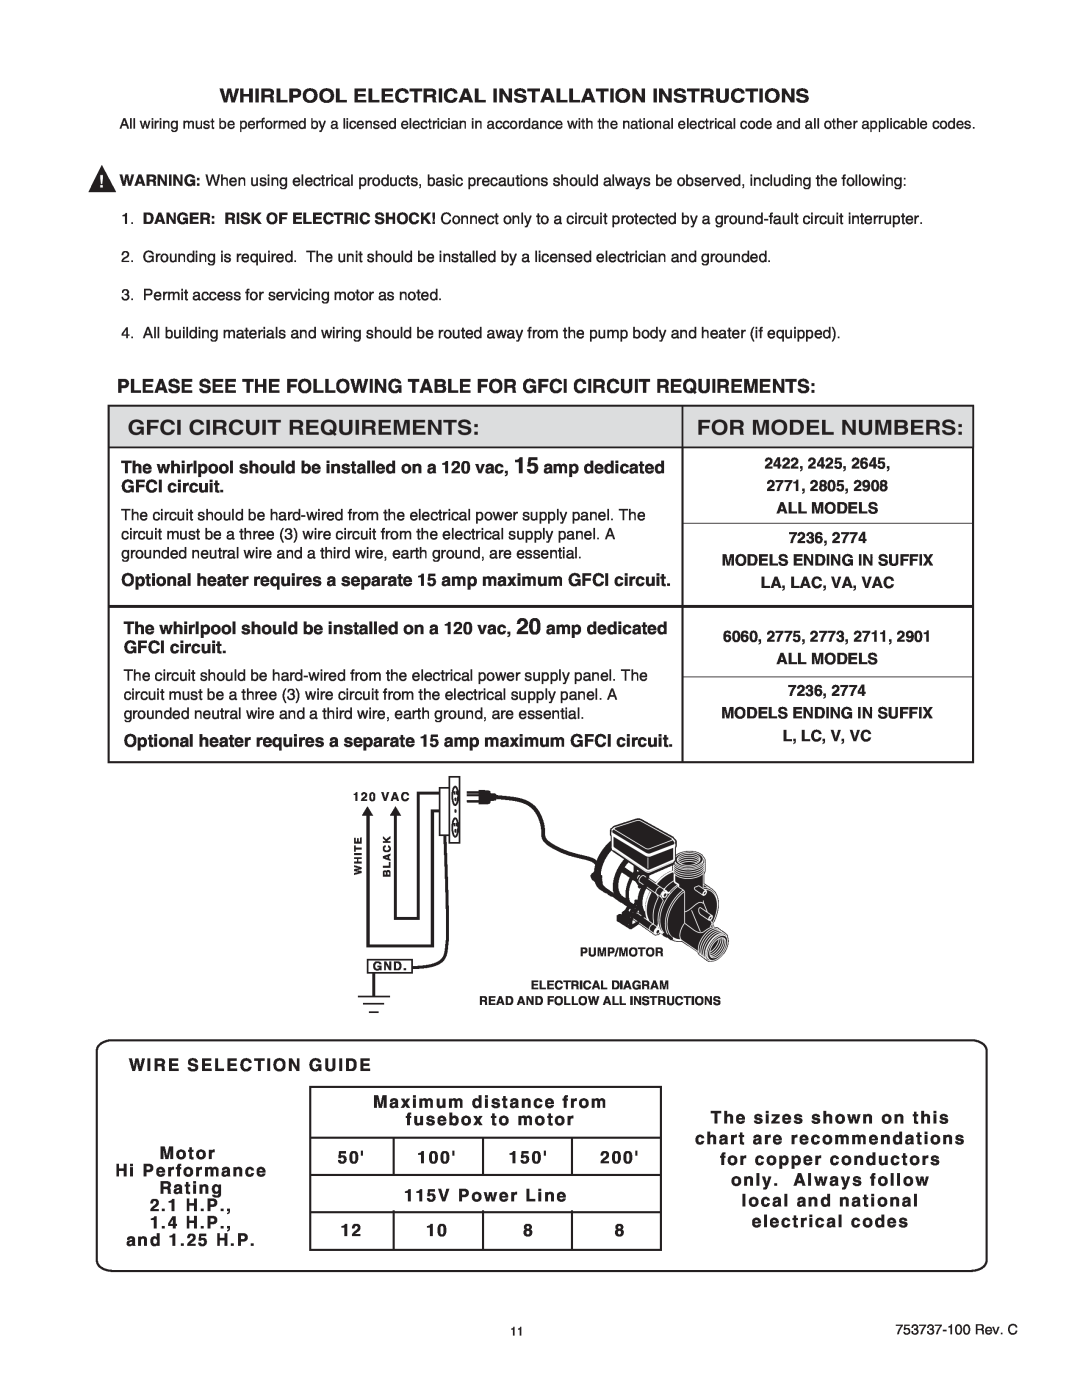 American Standard 7236L manual Gfci Circuit Requirements, For Model Numbers, Whirlpool Electrical Installation Instructions 